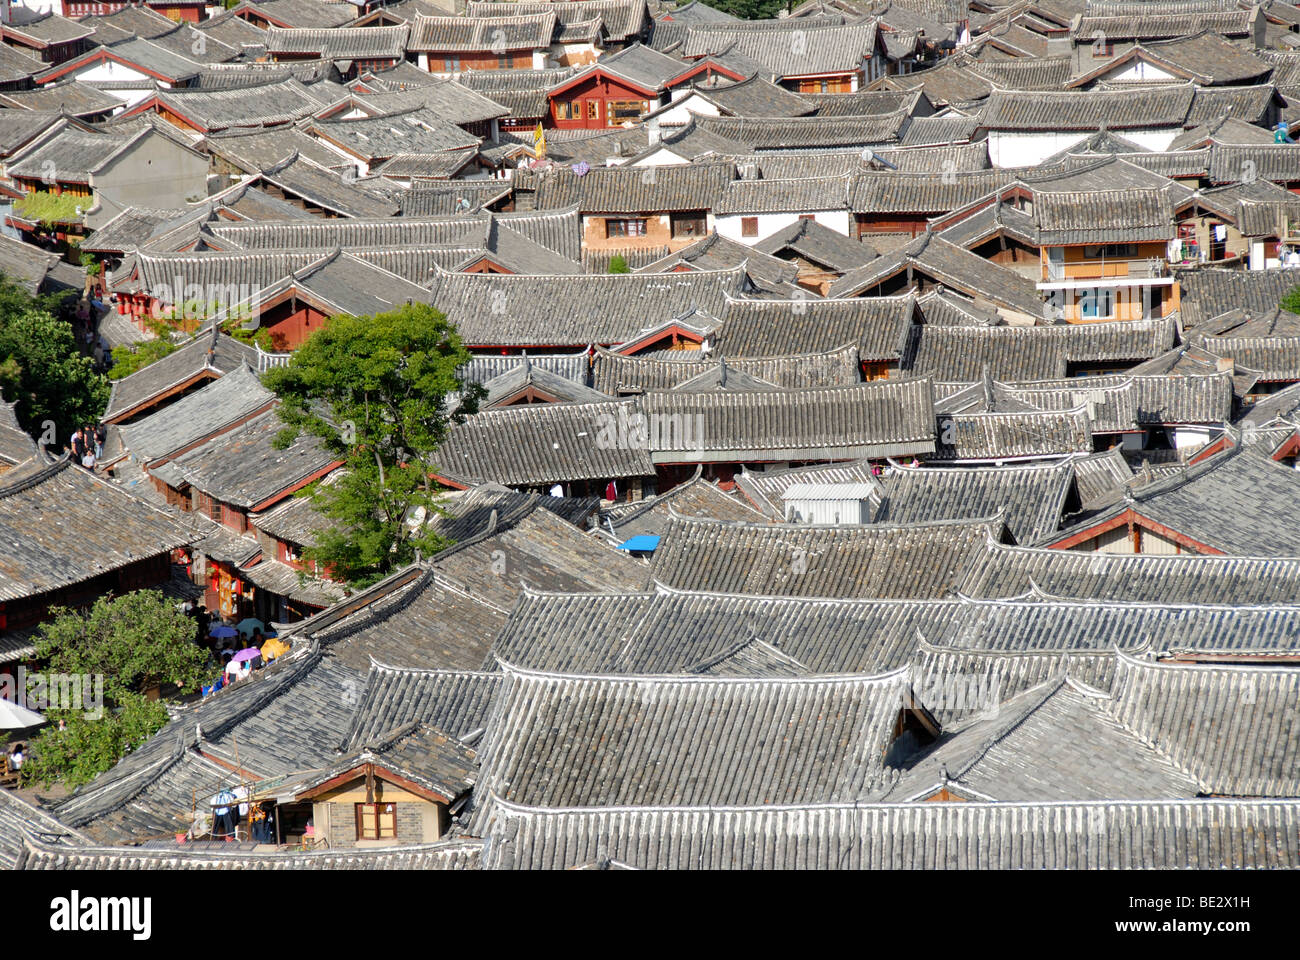 Tiled roofs, old town of Lijiang, UNESCO World Heritage Site, Yunnan Province, People's Republic of China, Asia Stock Photo